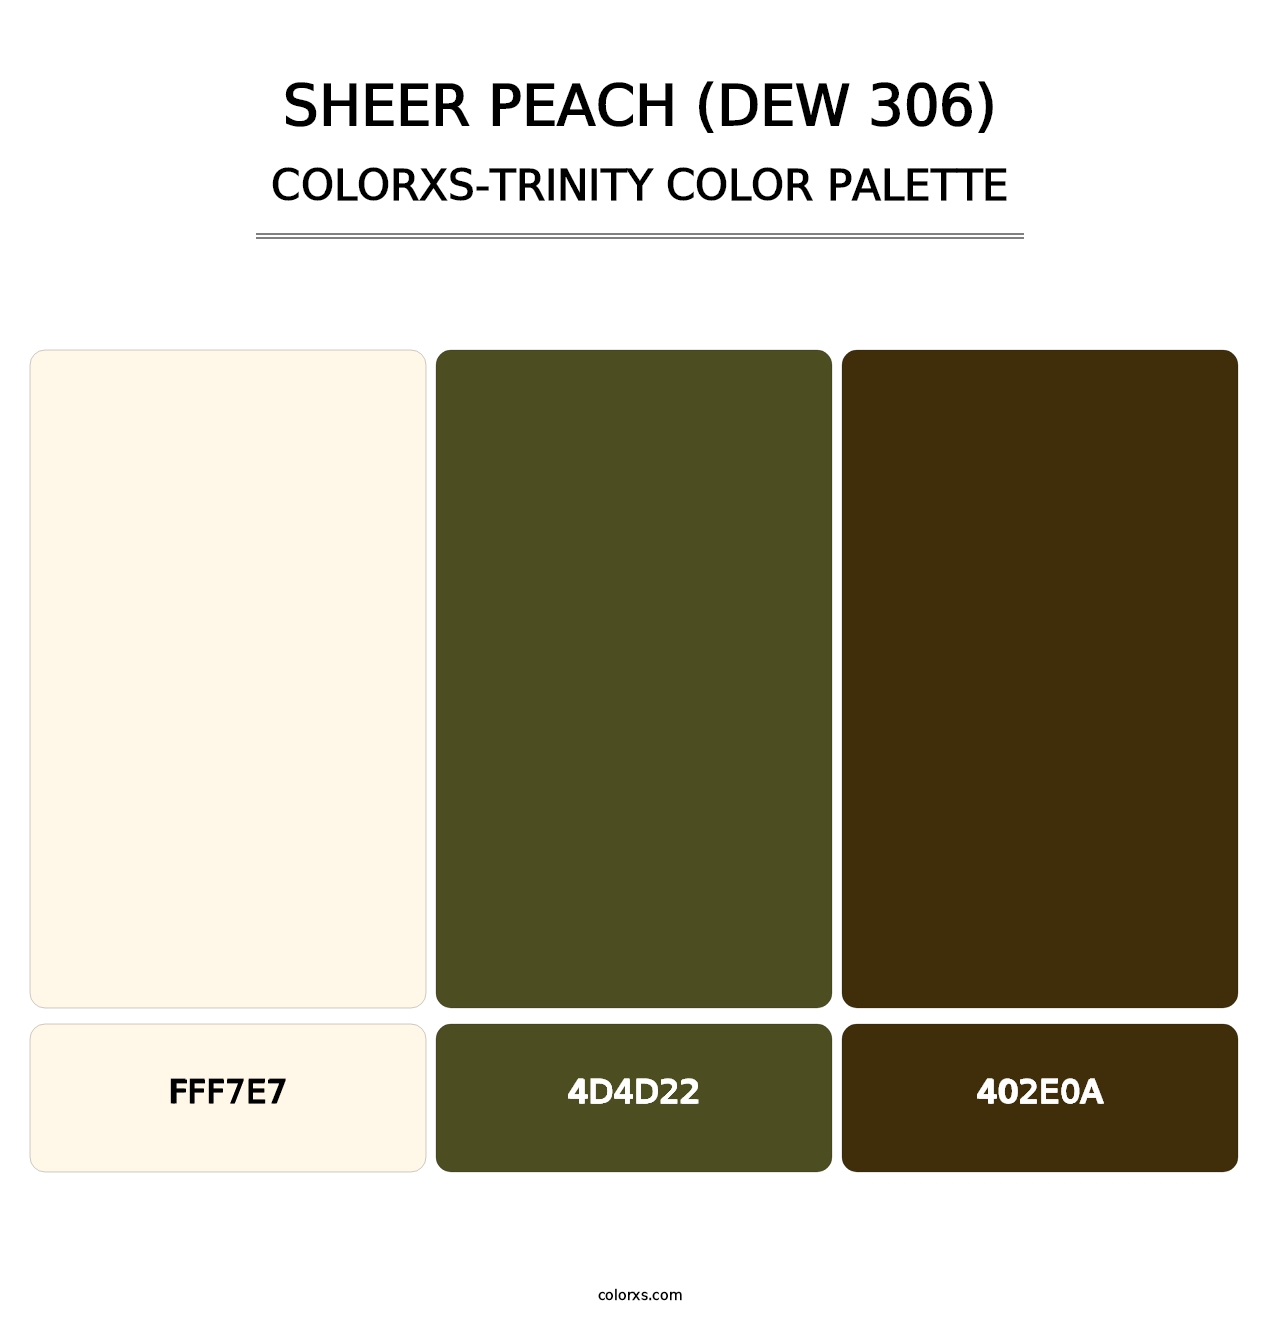 Sheer Peach (DEW 306) - Colorxs Trinity Palette